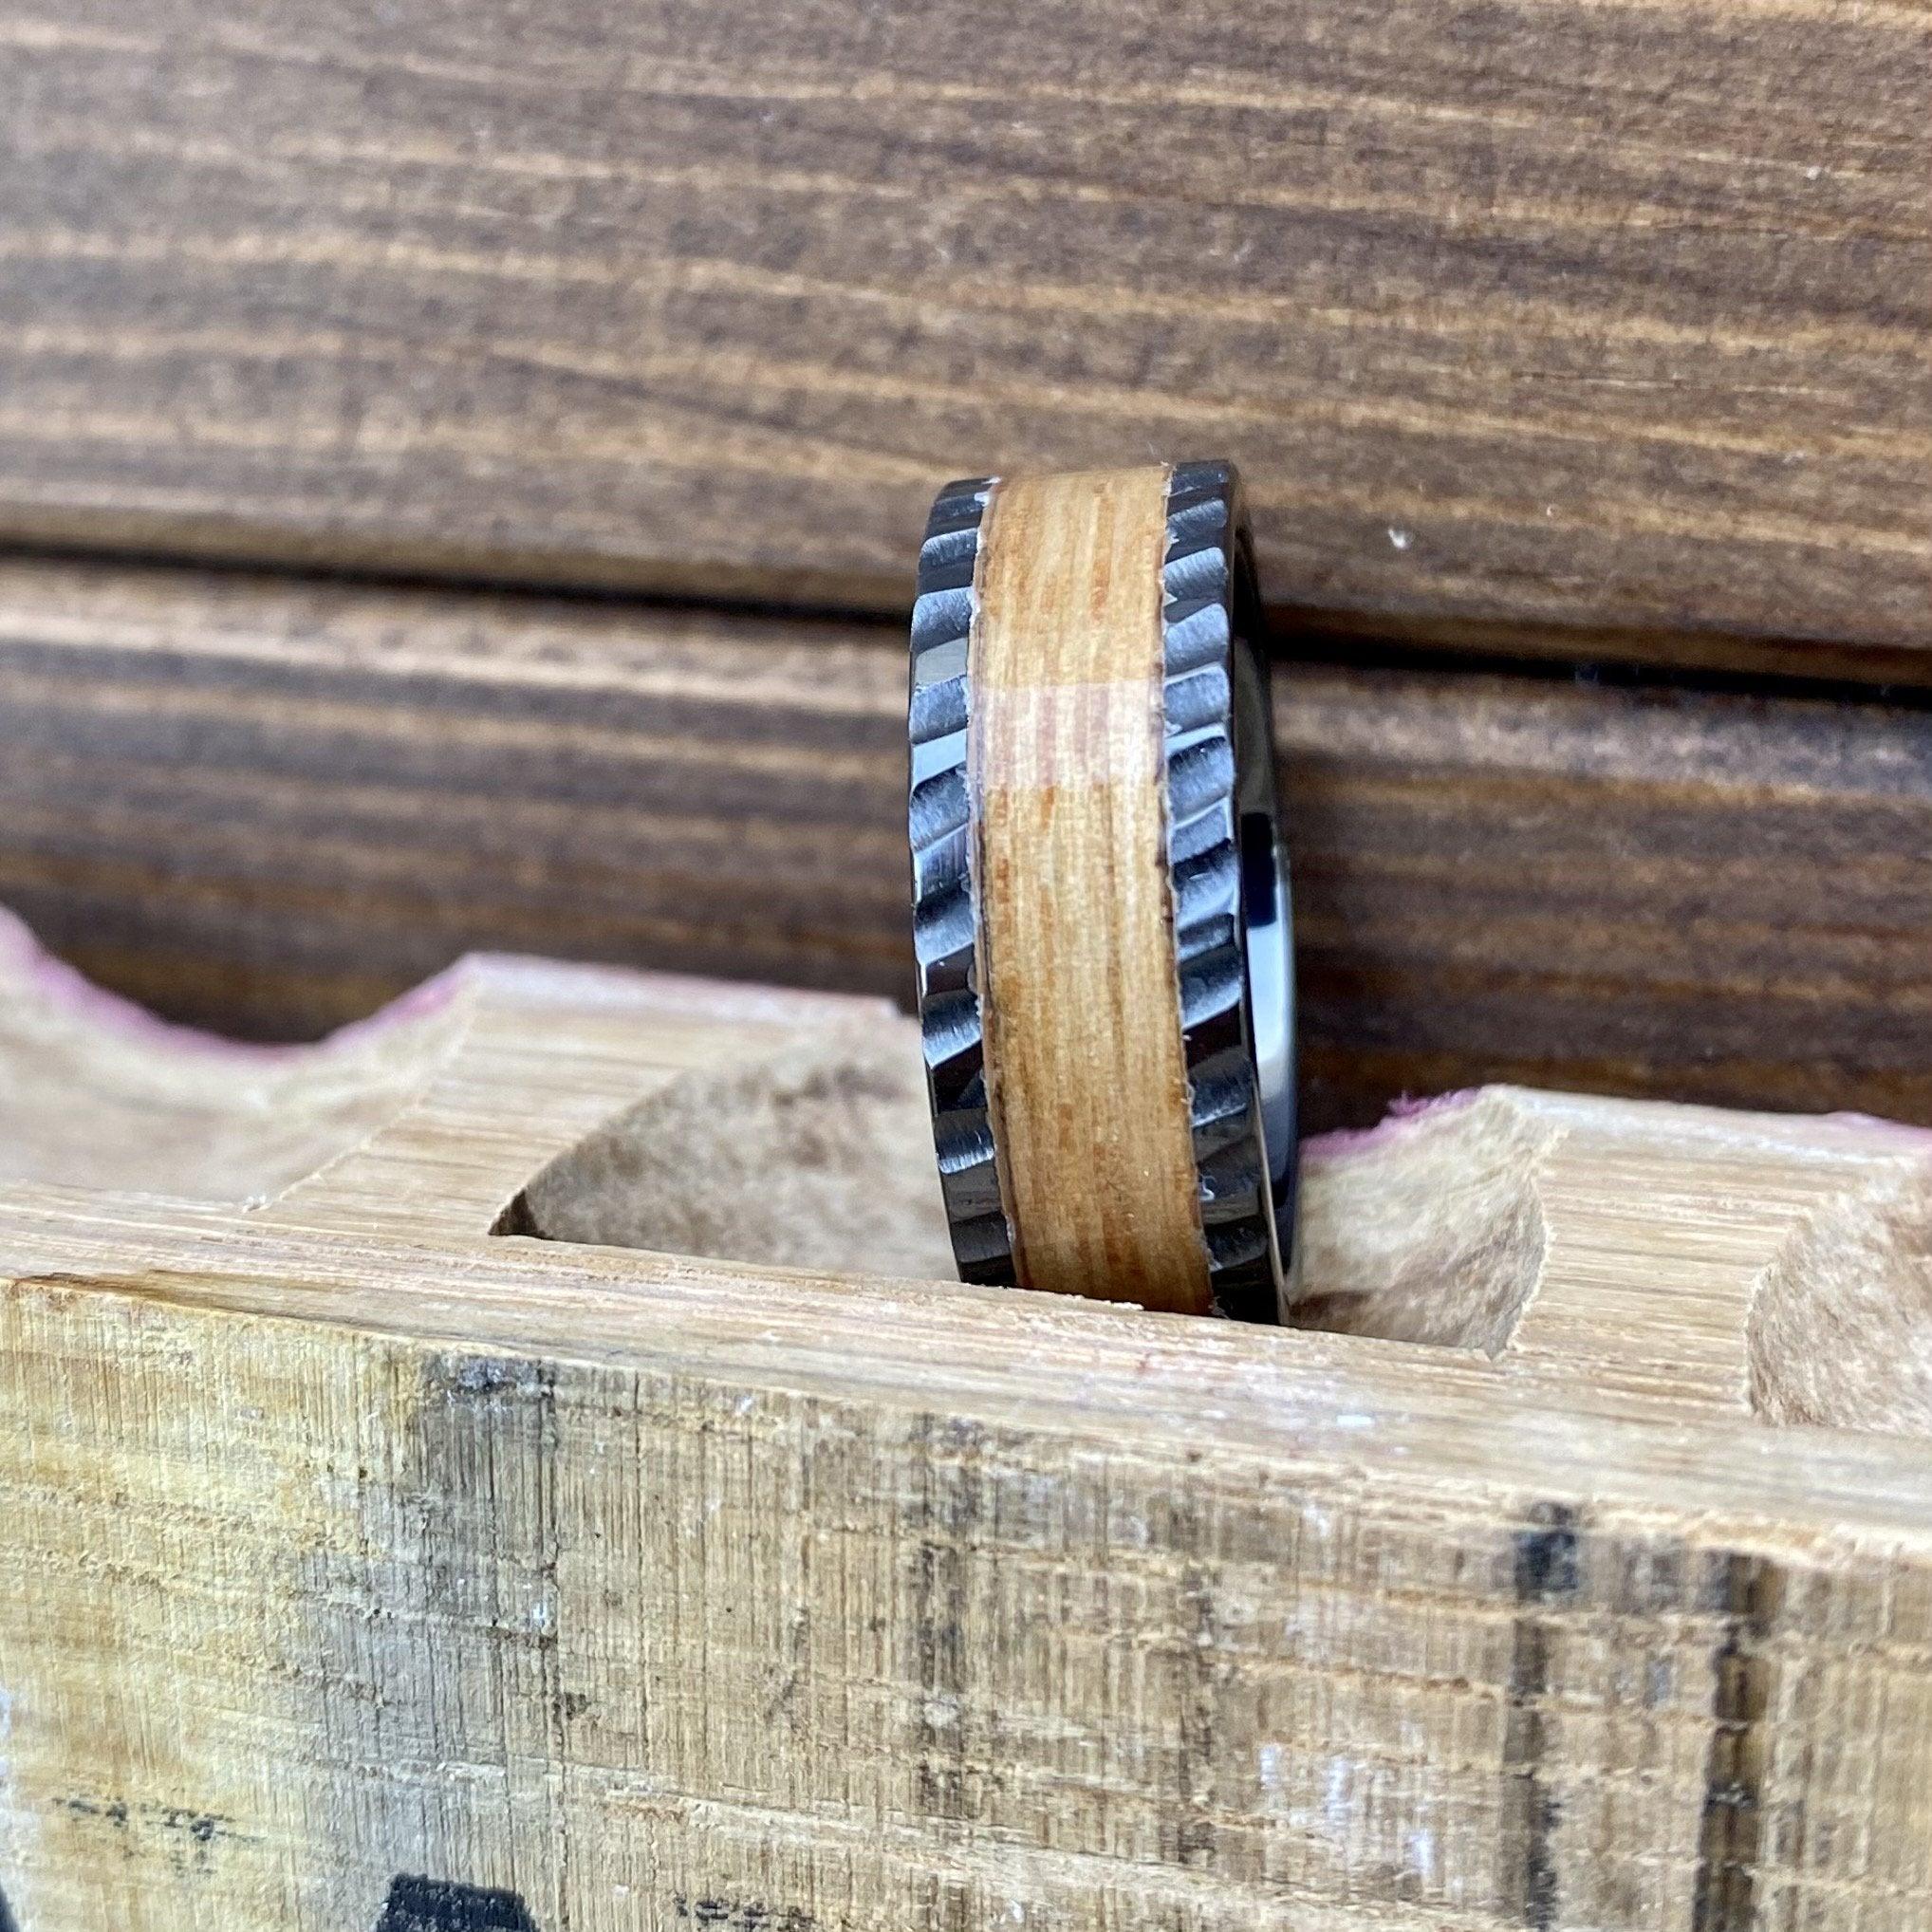 BW James Jewelers ALT Wedding Band "The Barrel Maker" 100% USA Made Build Your Own Ring Black Diamond Ceramic Pipe Cut Band Scored Finish